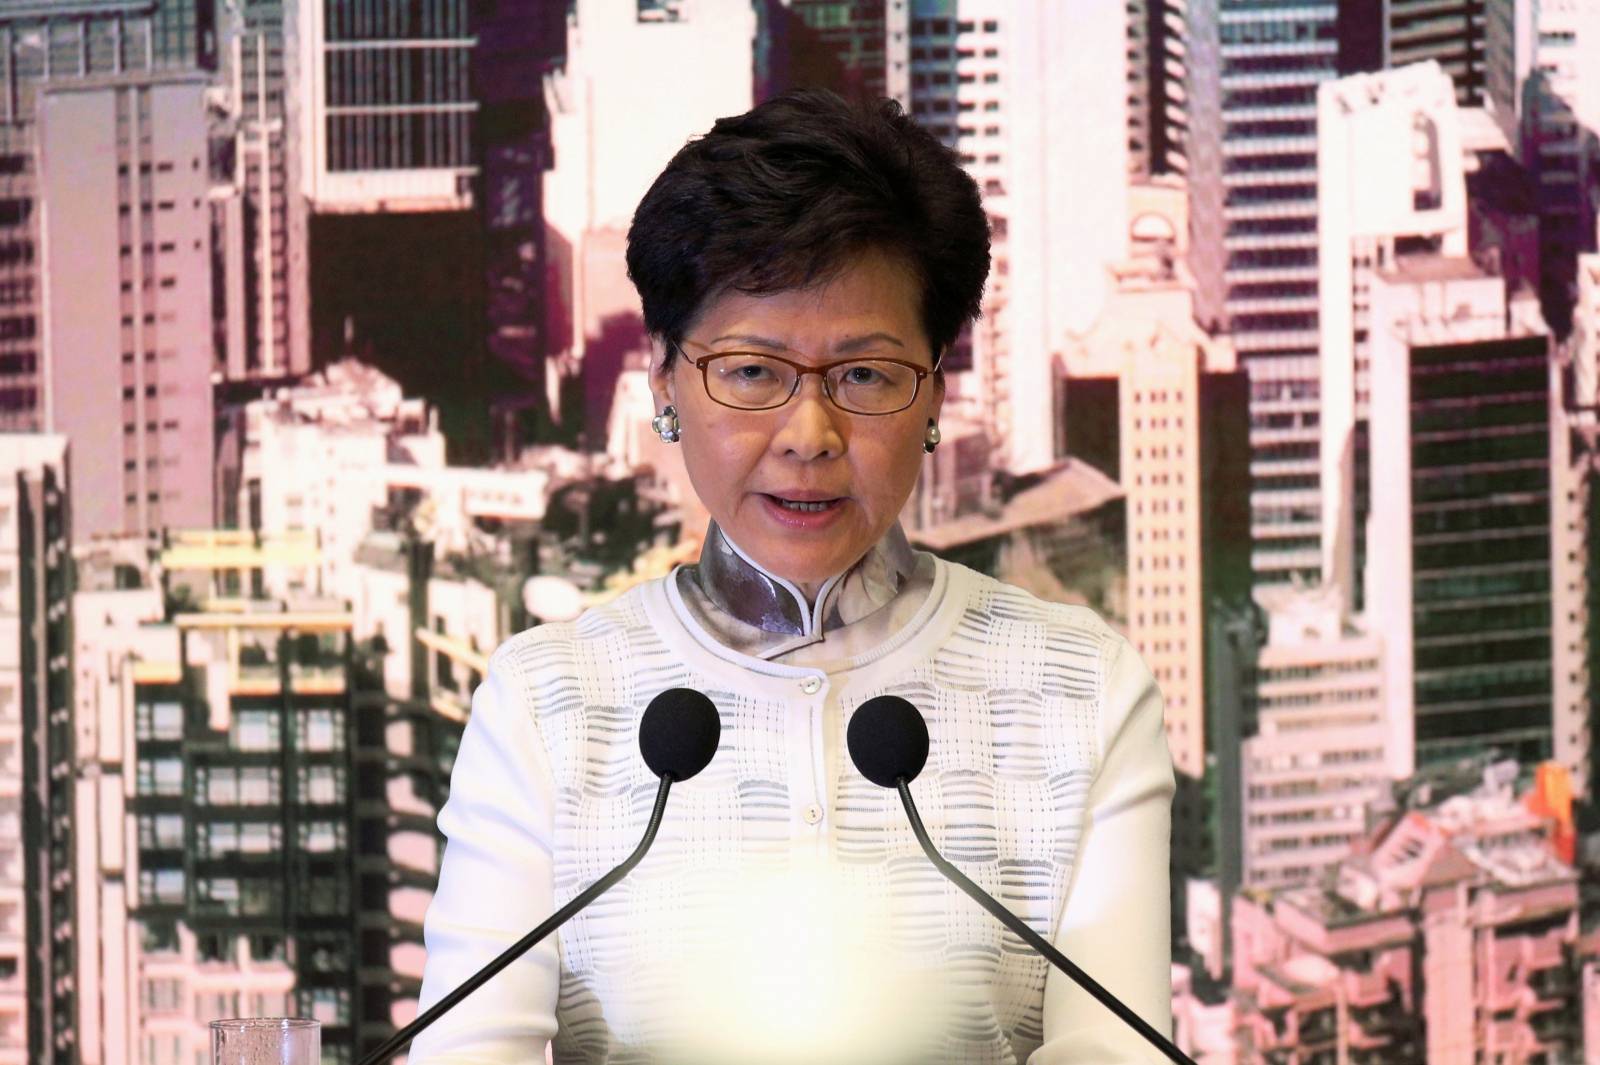 Hong Kong Chief Executive Carrie Lam attends a news conference in Hong Kong